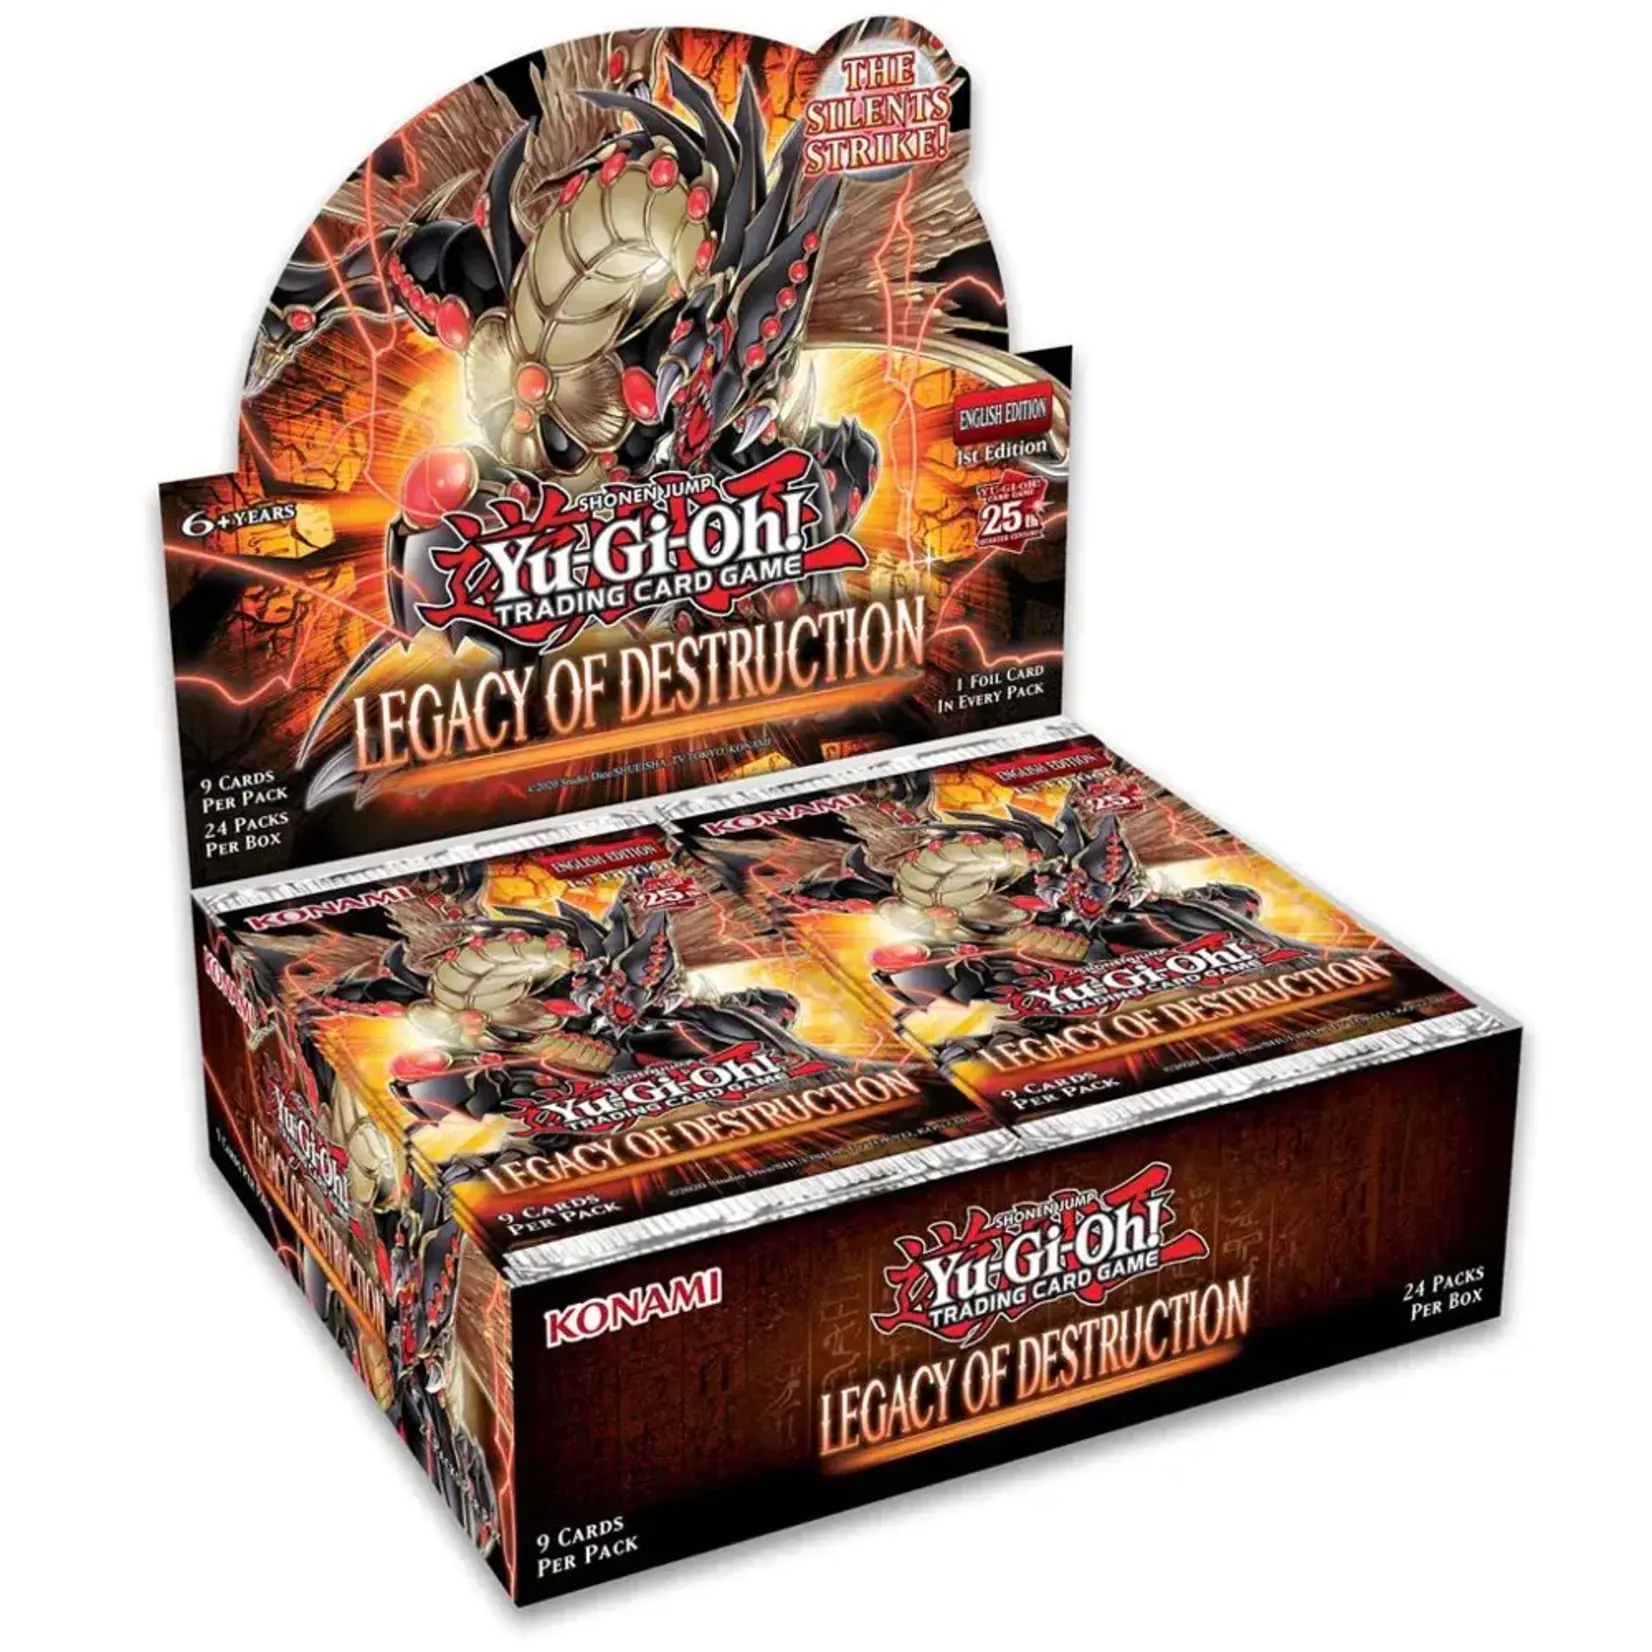 Yugioh legacy of destruction boosterbox